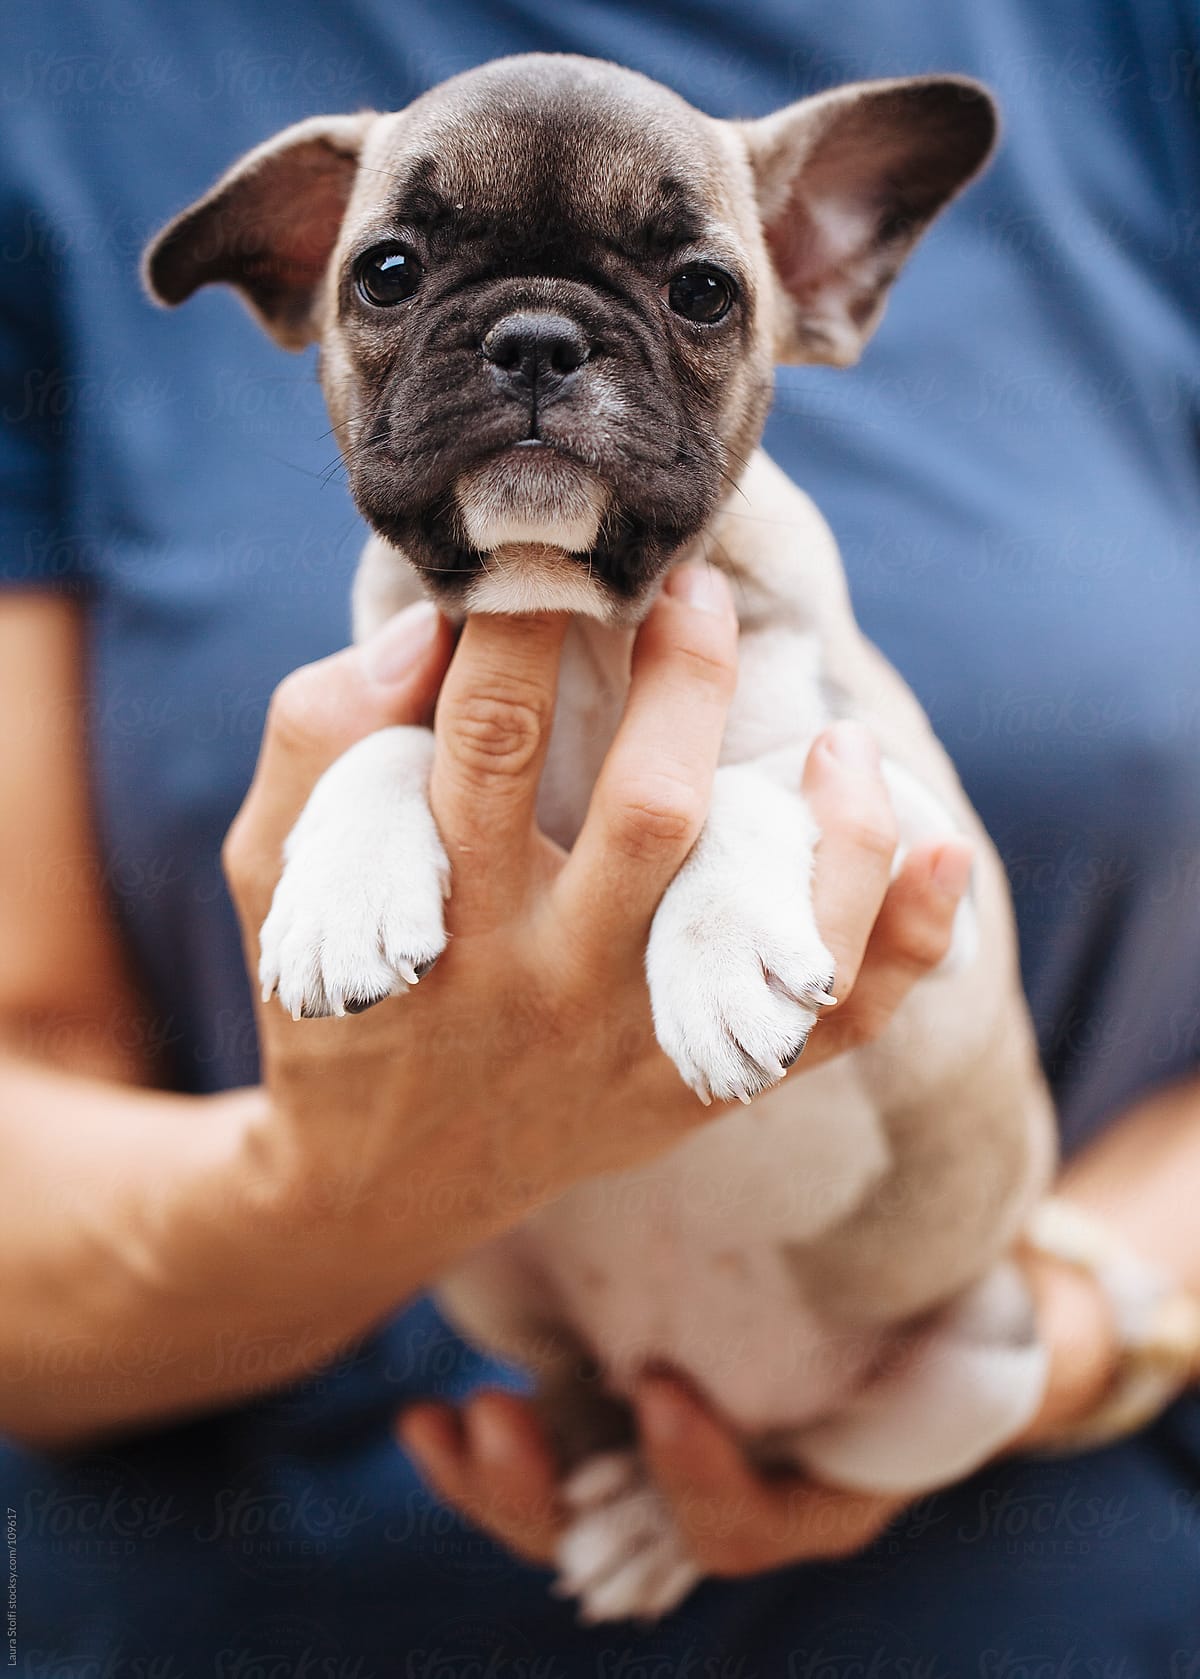 Woman holding in her arms a French Bulldog puppy who looks straight at the camera